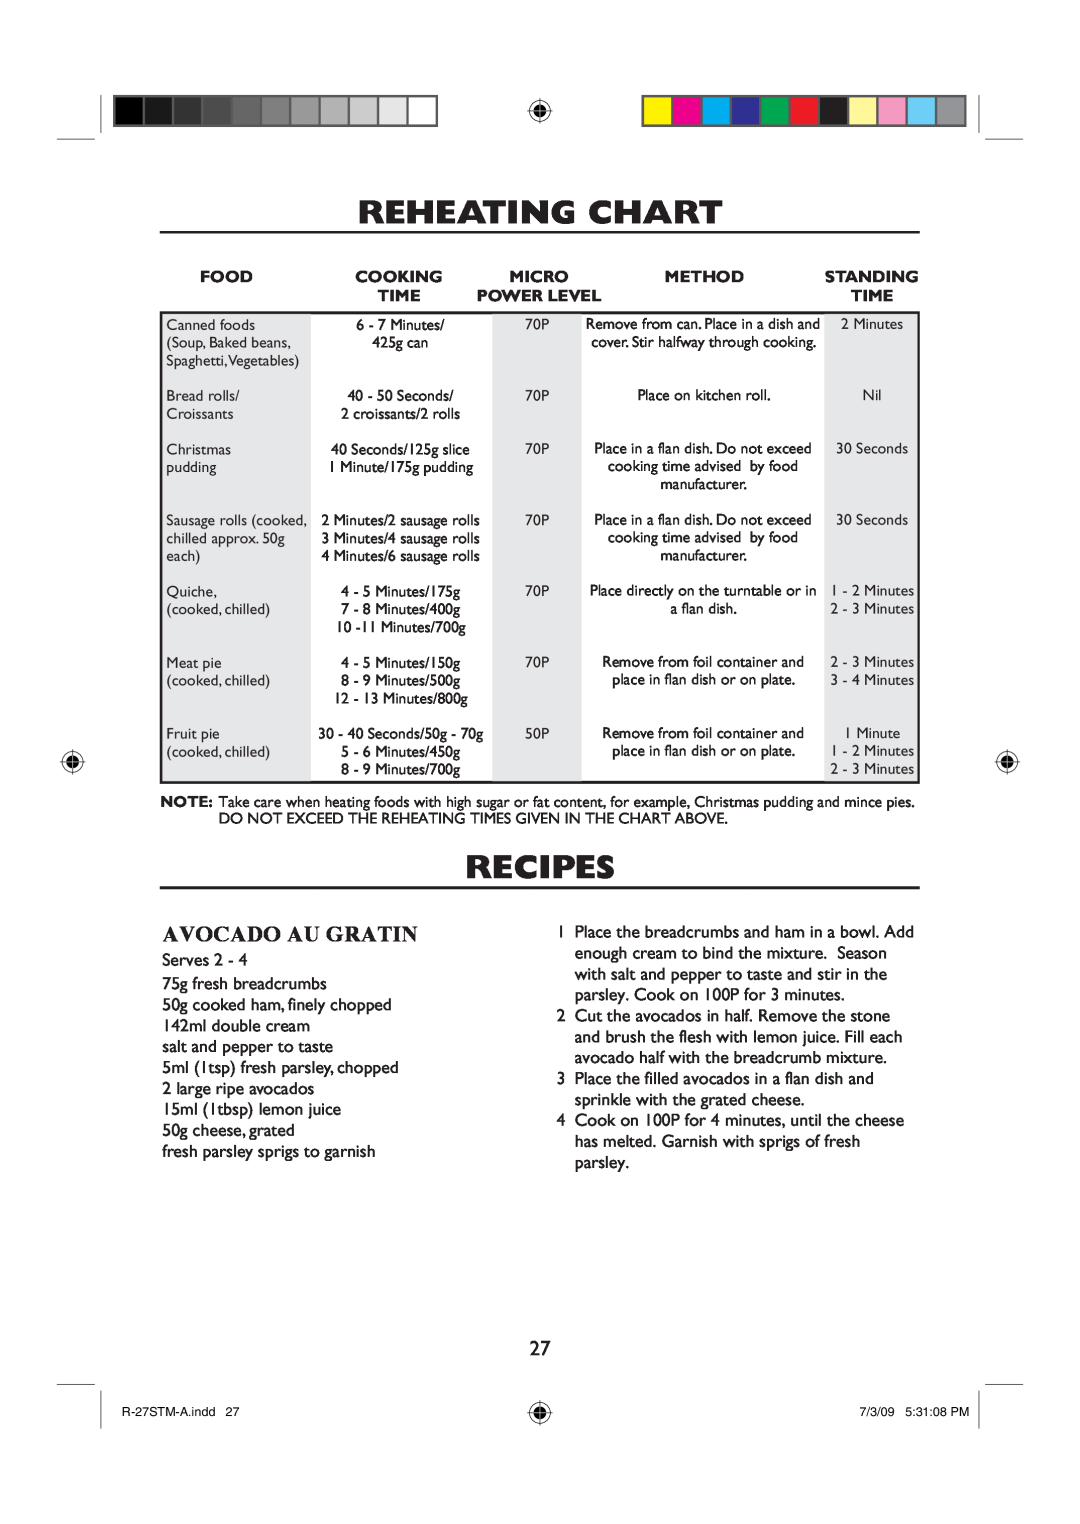 Sharp R-27STM-A Reheating Chart, Recipes, Avocado Au Gratin, Food, Cooking, Micro, Method, Standing, Time, Power Level 